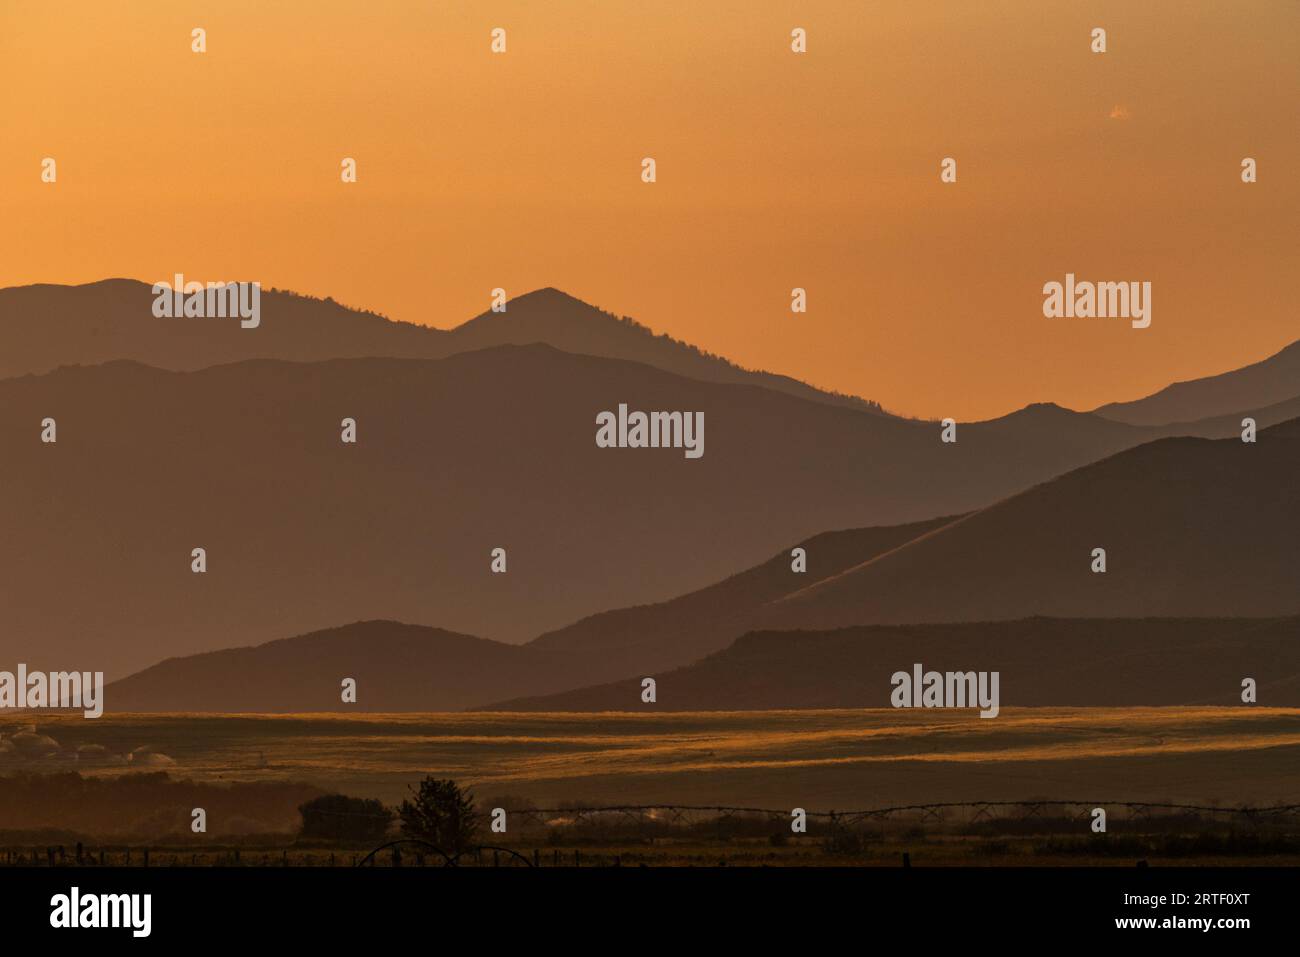 USA, Idaho, Bellevue, Scenic view of mountain landscape at sunset Stock Photo